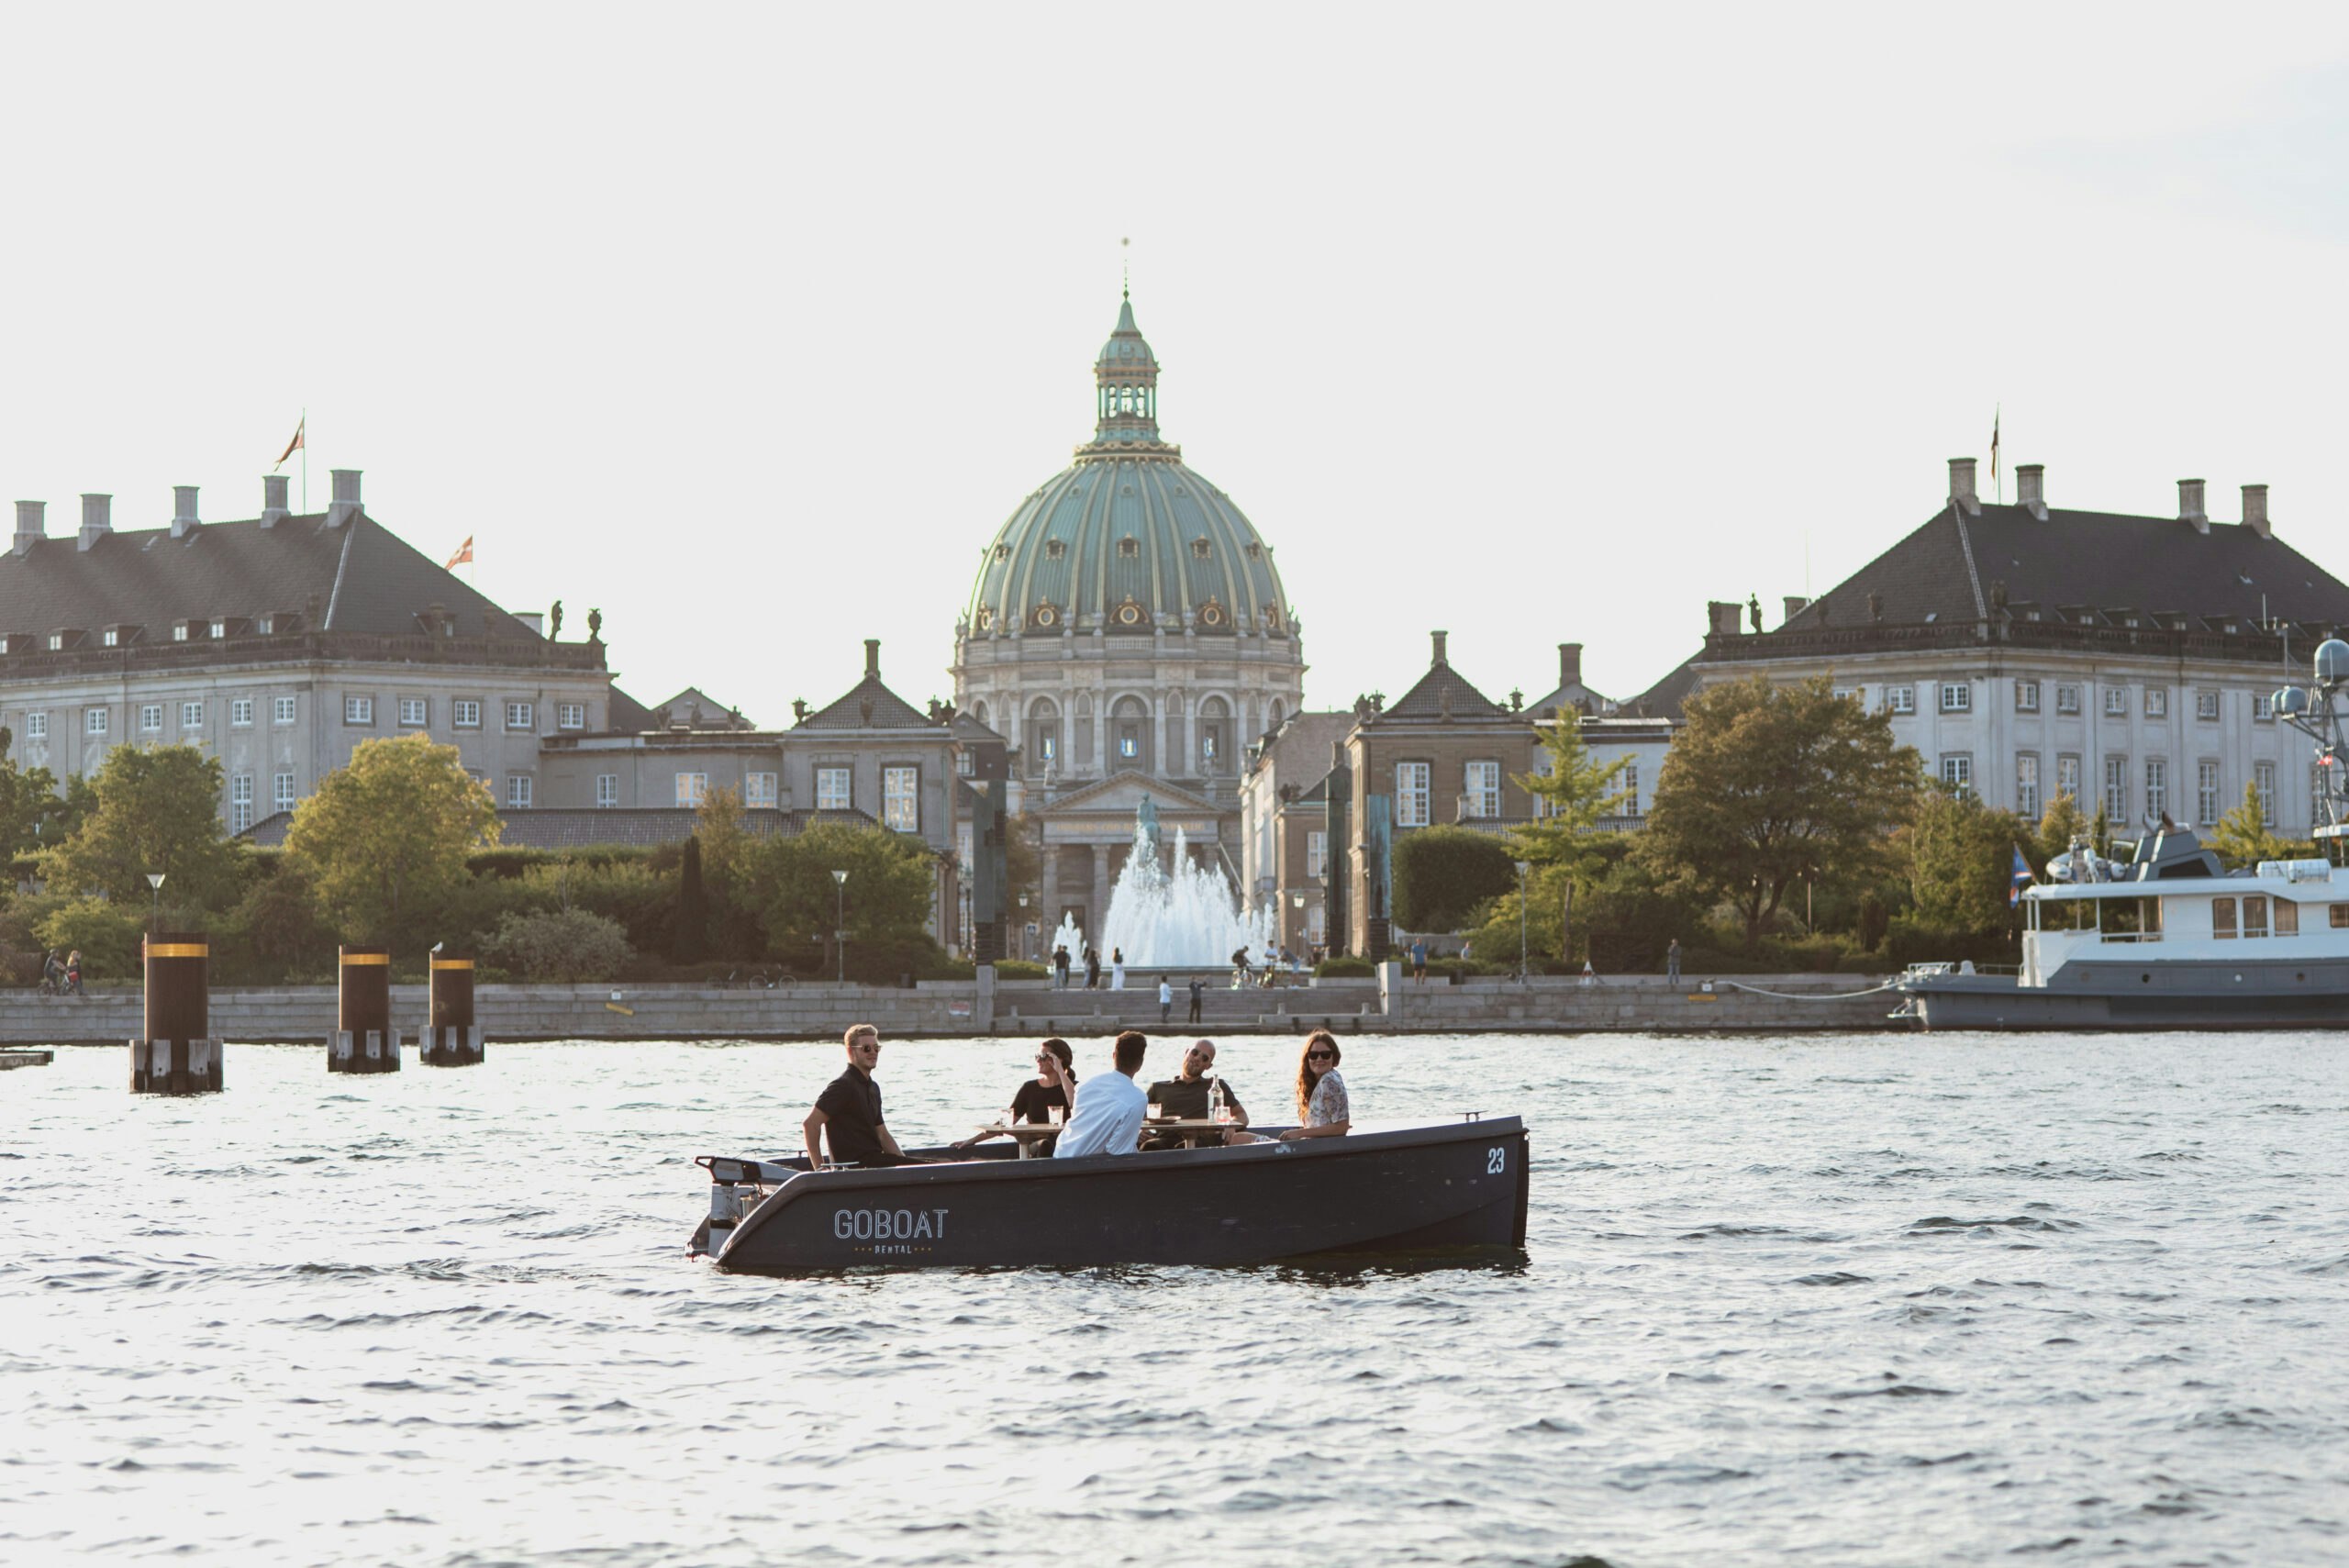 GoBoat in front of Amalienborg